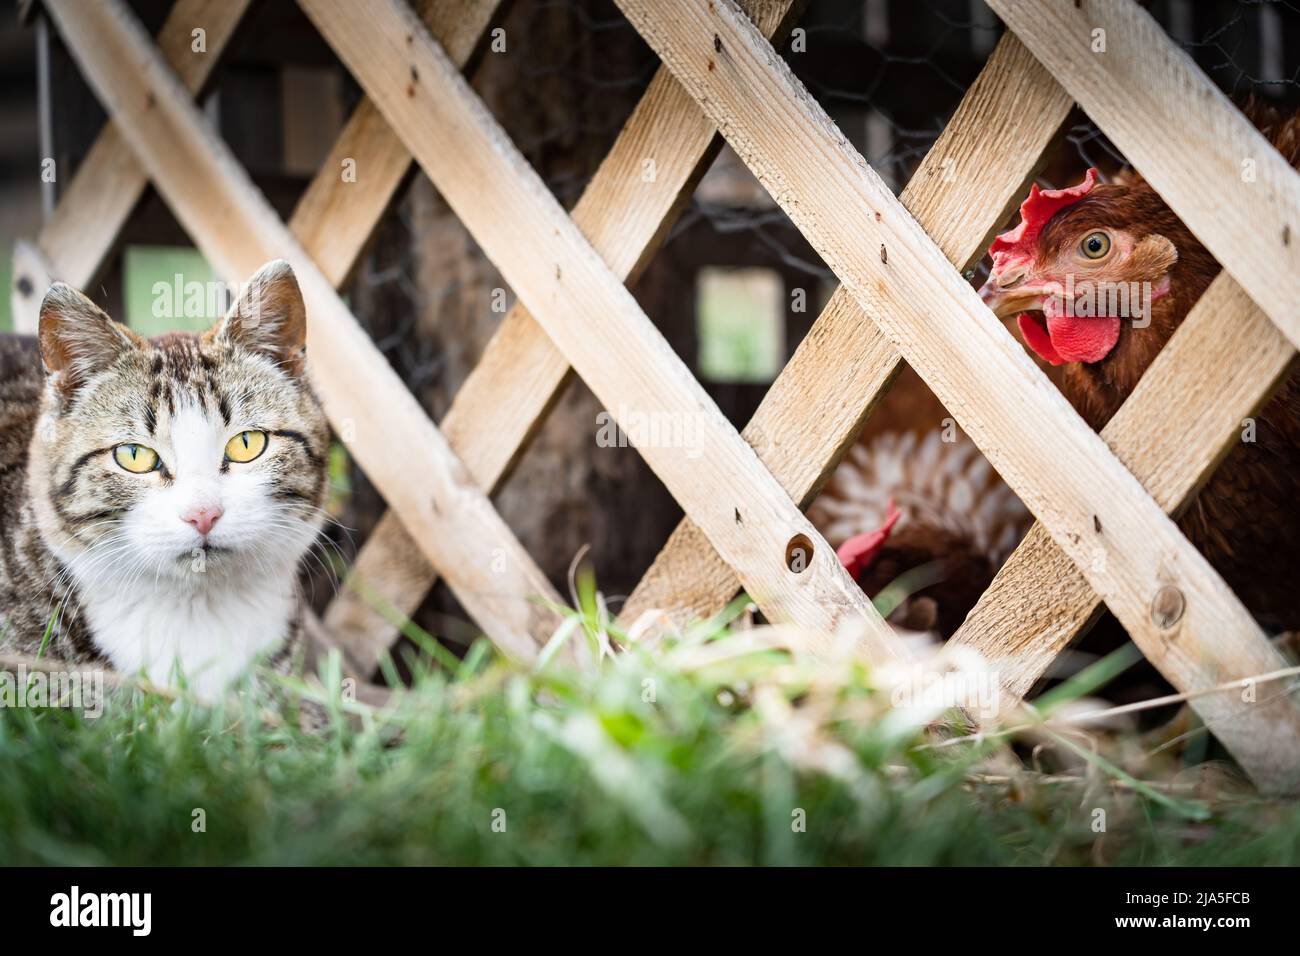 A young farm cat watching caged backyard chickens eating feed through a wooden fence built for urban hens in Alberta Canada Stock Photo